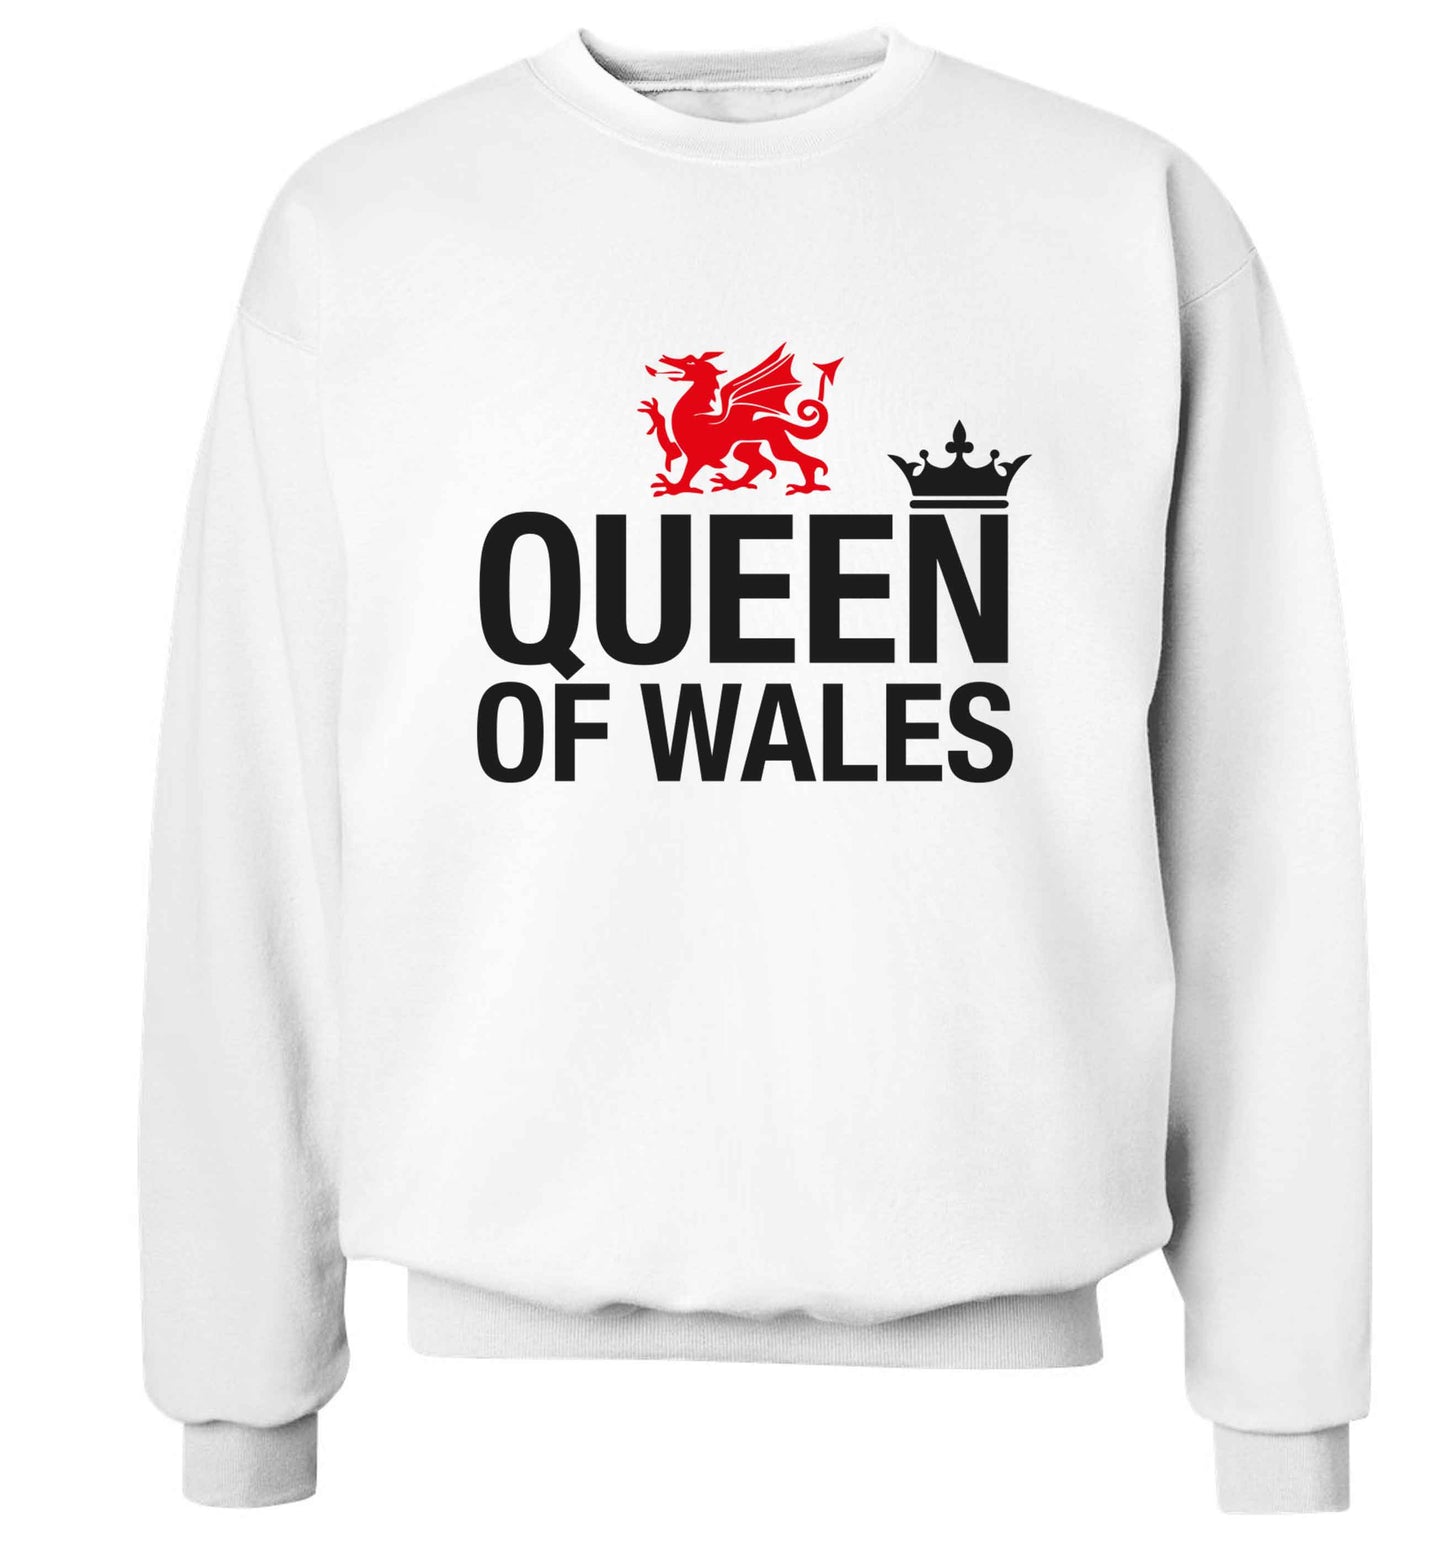 Queen of Wales Adult's unisex white Sweater 2XL